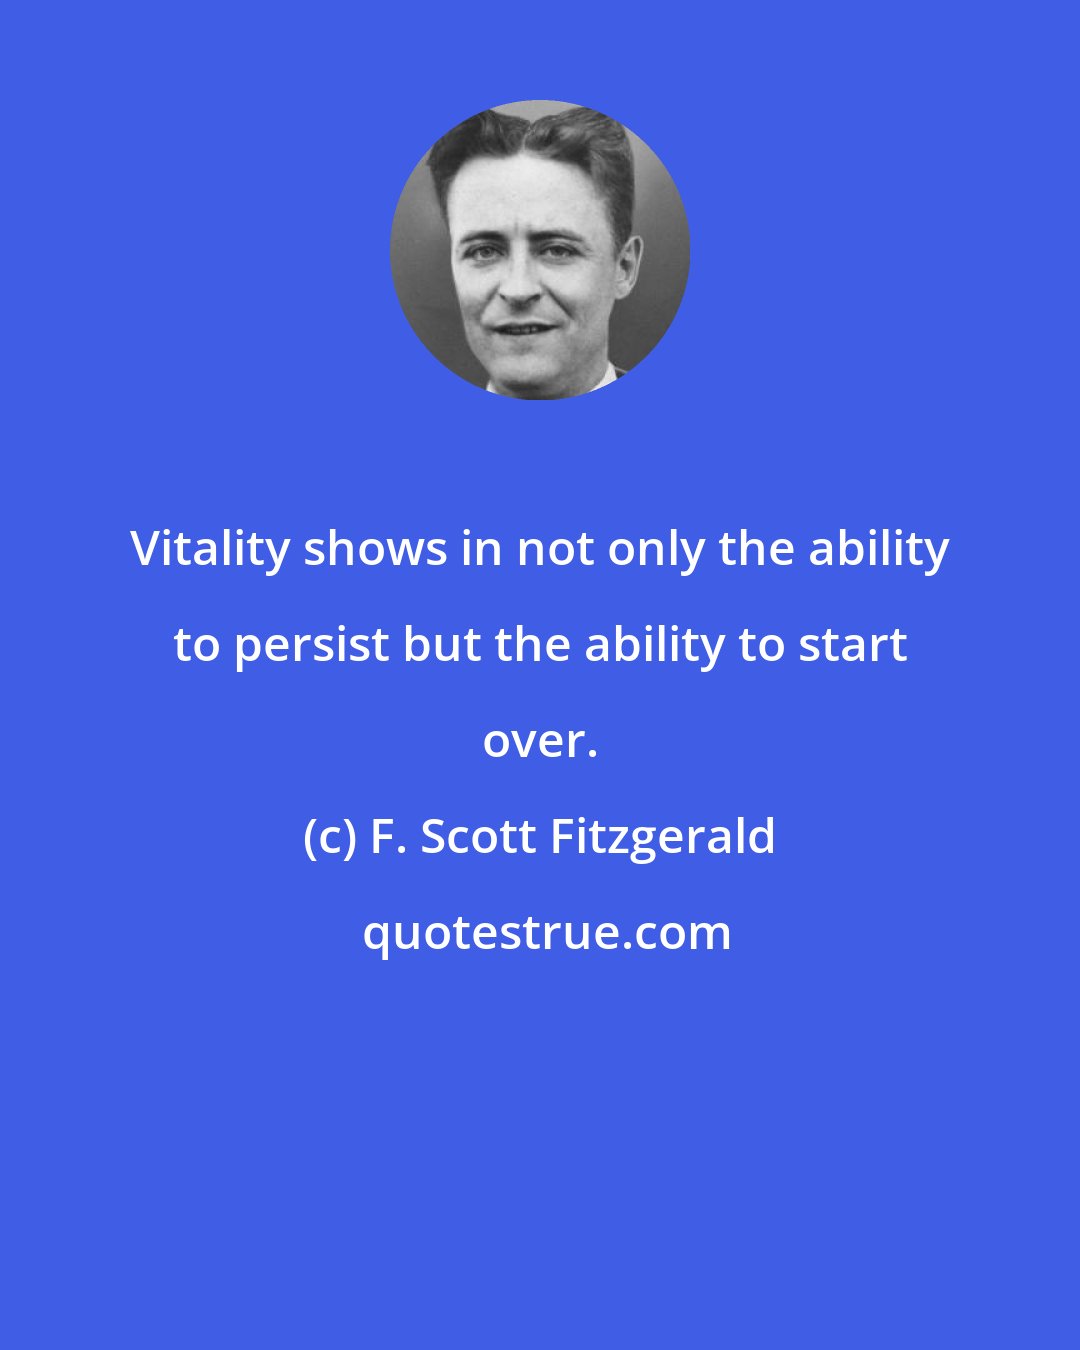 F. Scott Fitzgerald: Vitality shows in not only the ability to persist but the ability to start over.